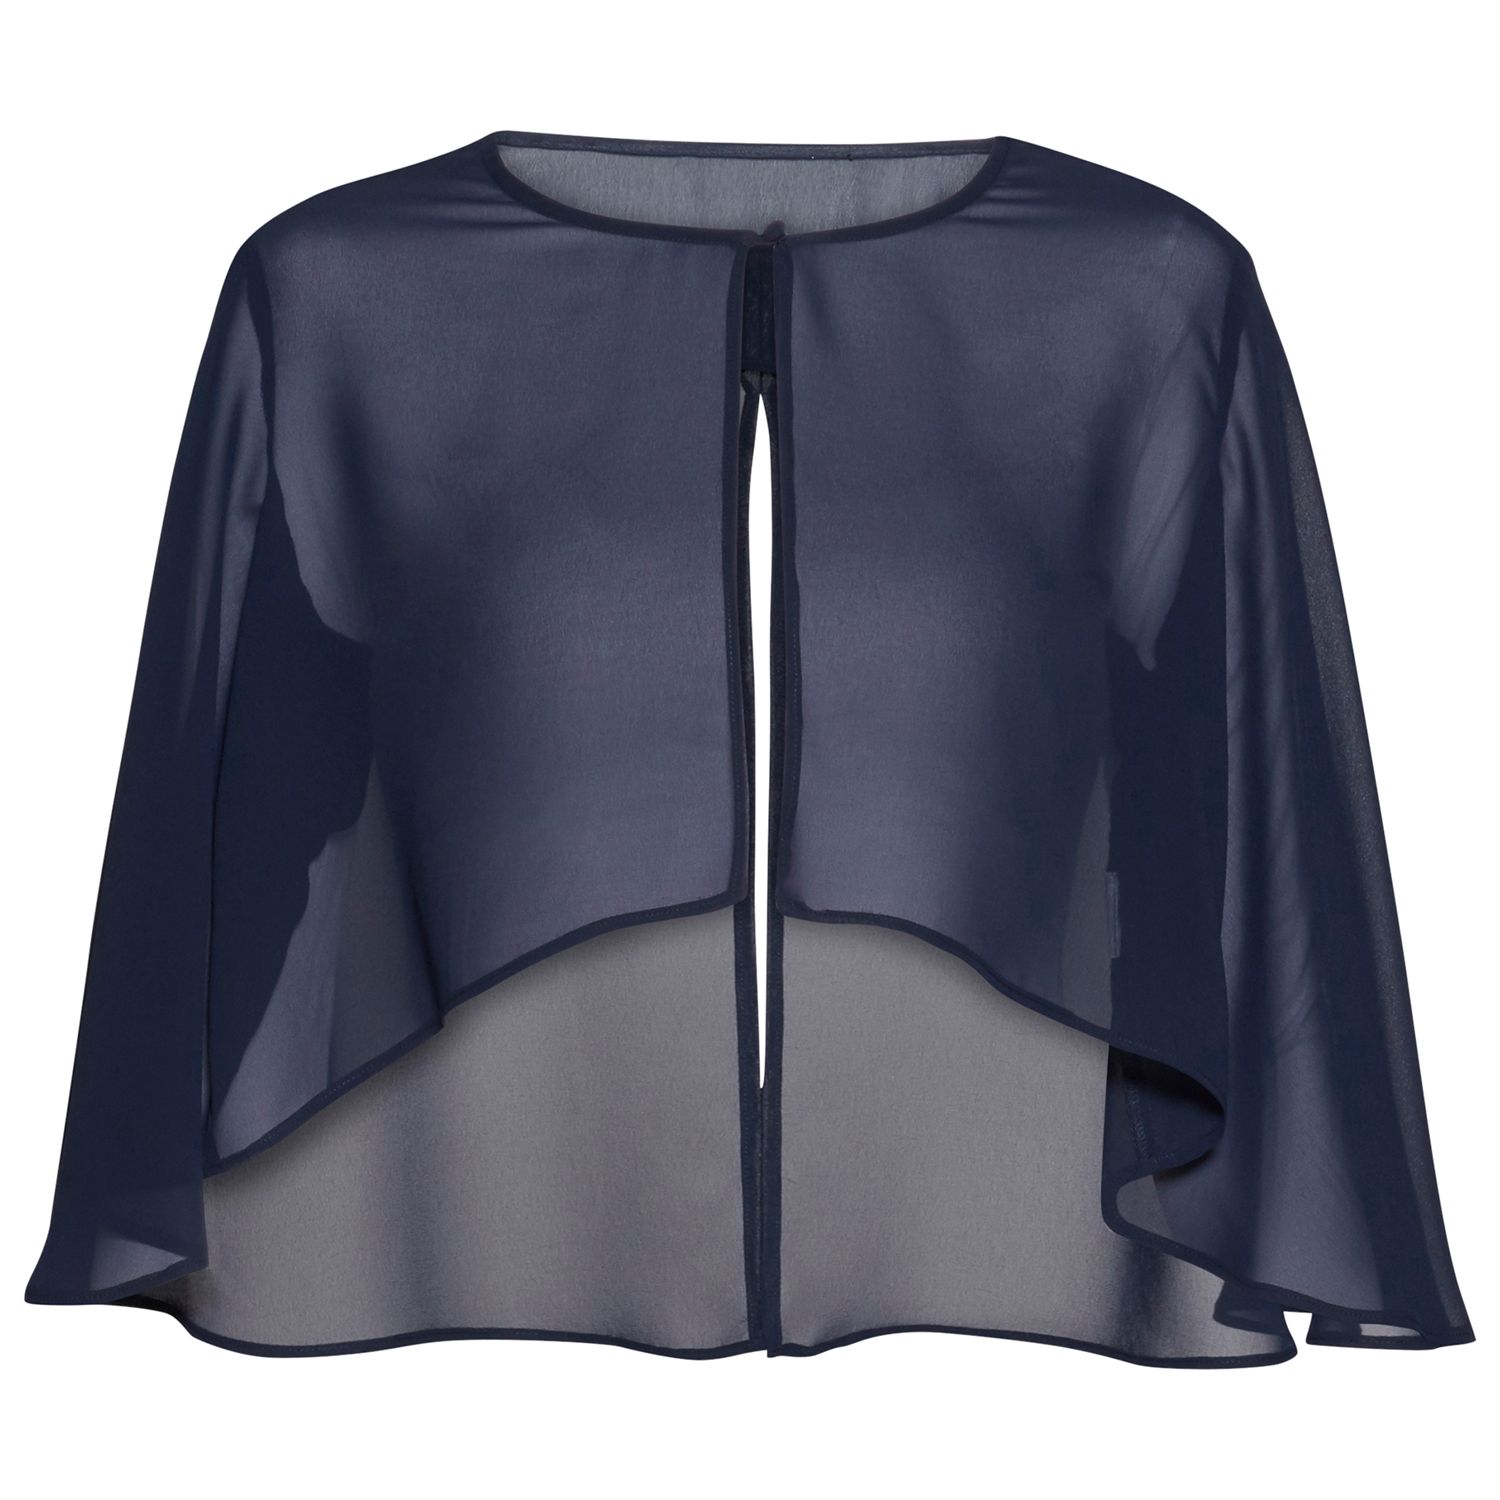 Gina Bacconi Chiffon Cape With Open Back Detail, Spring Navy, 22